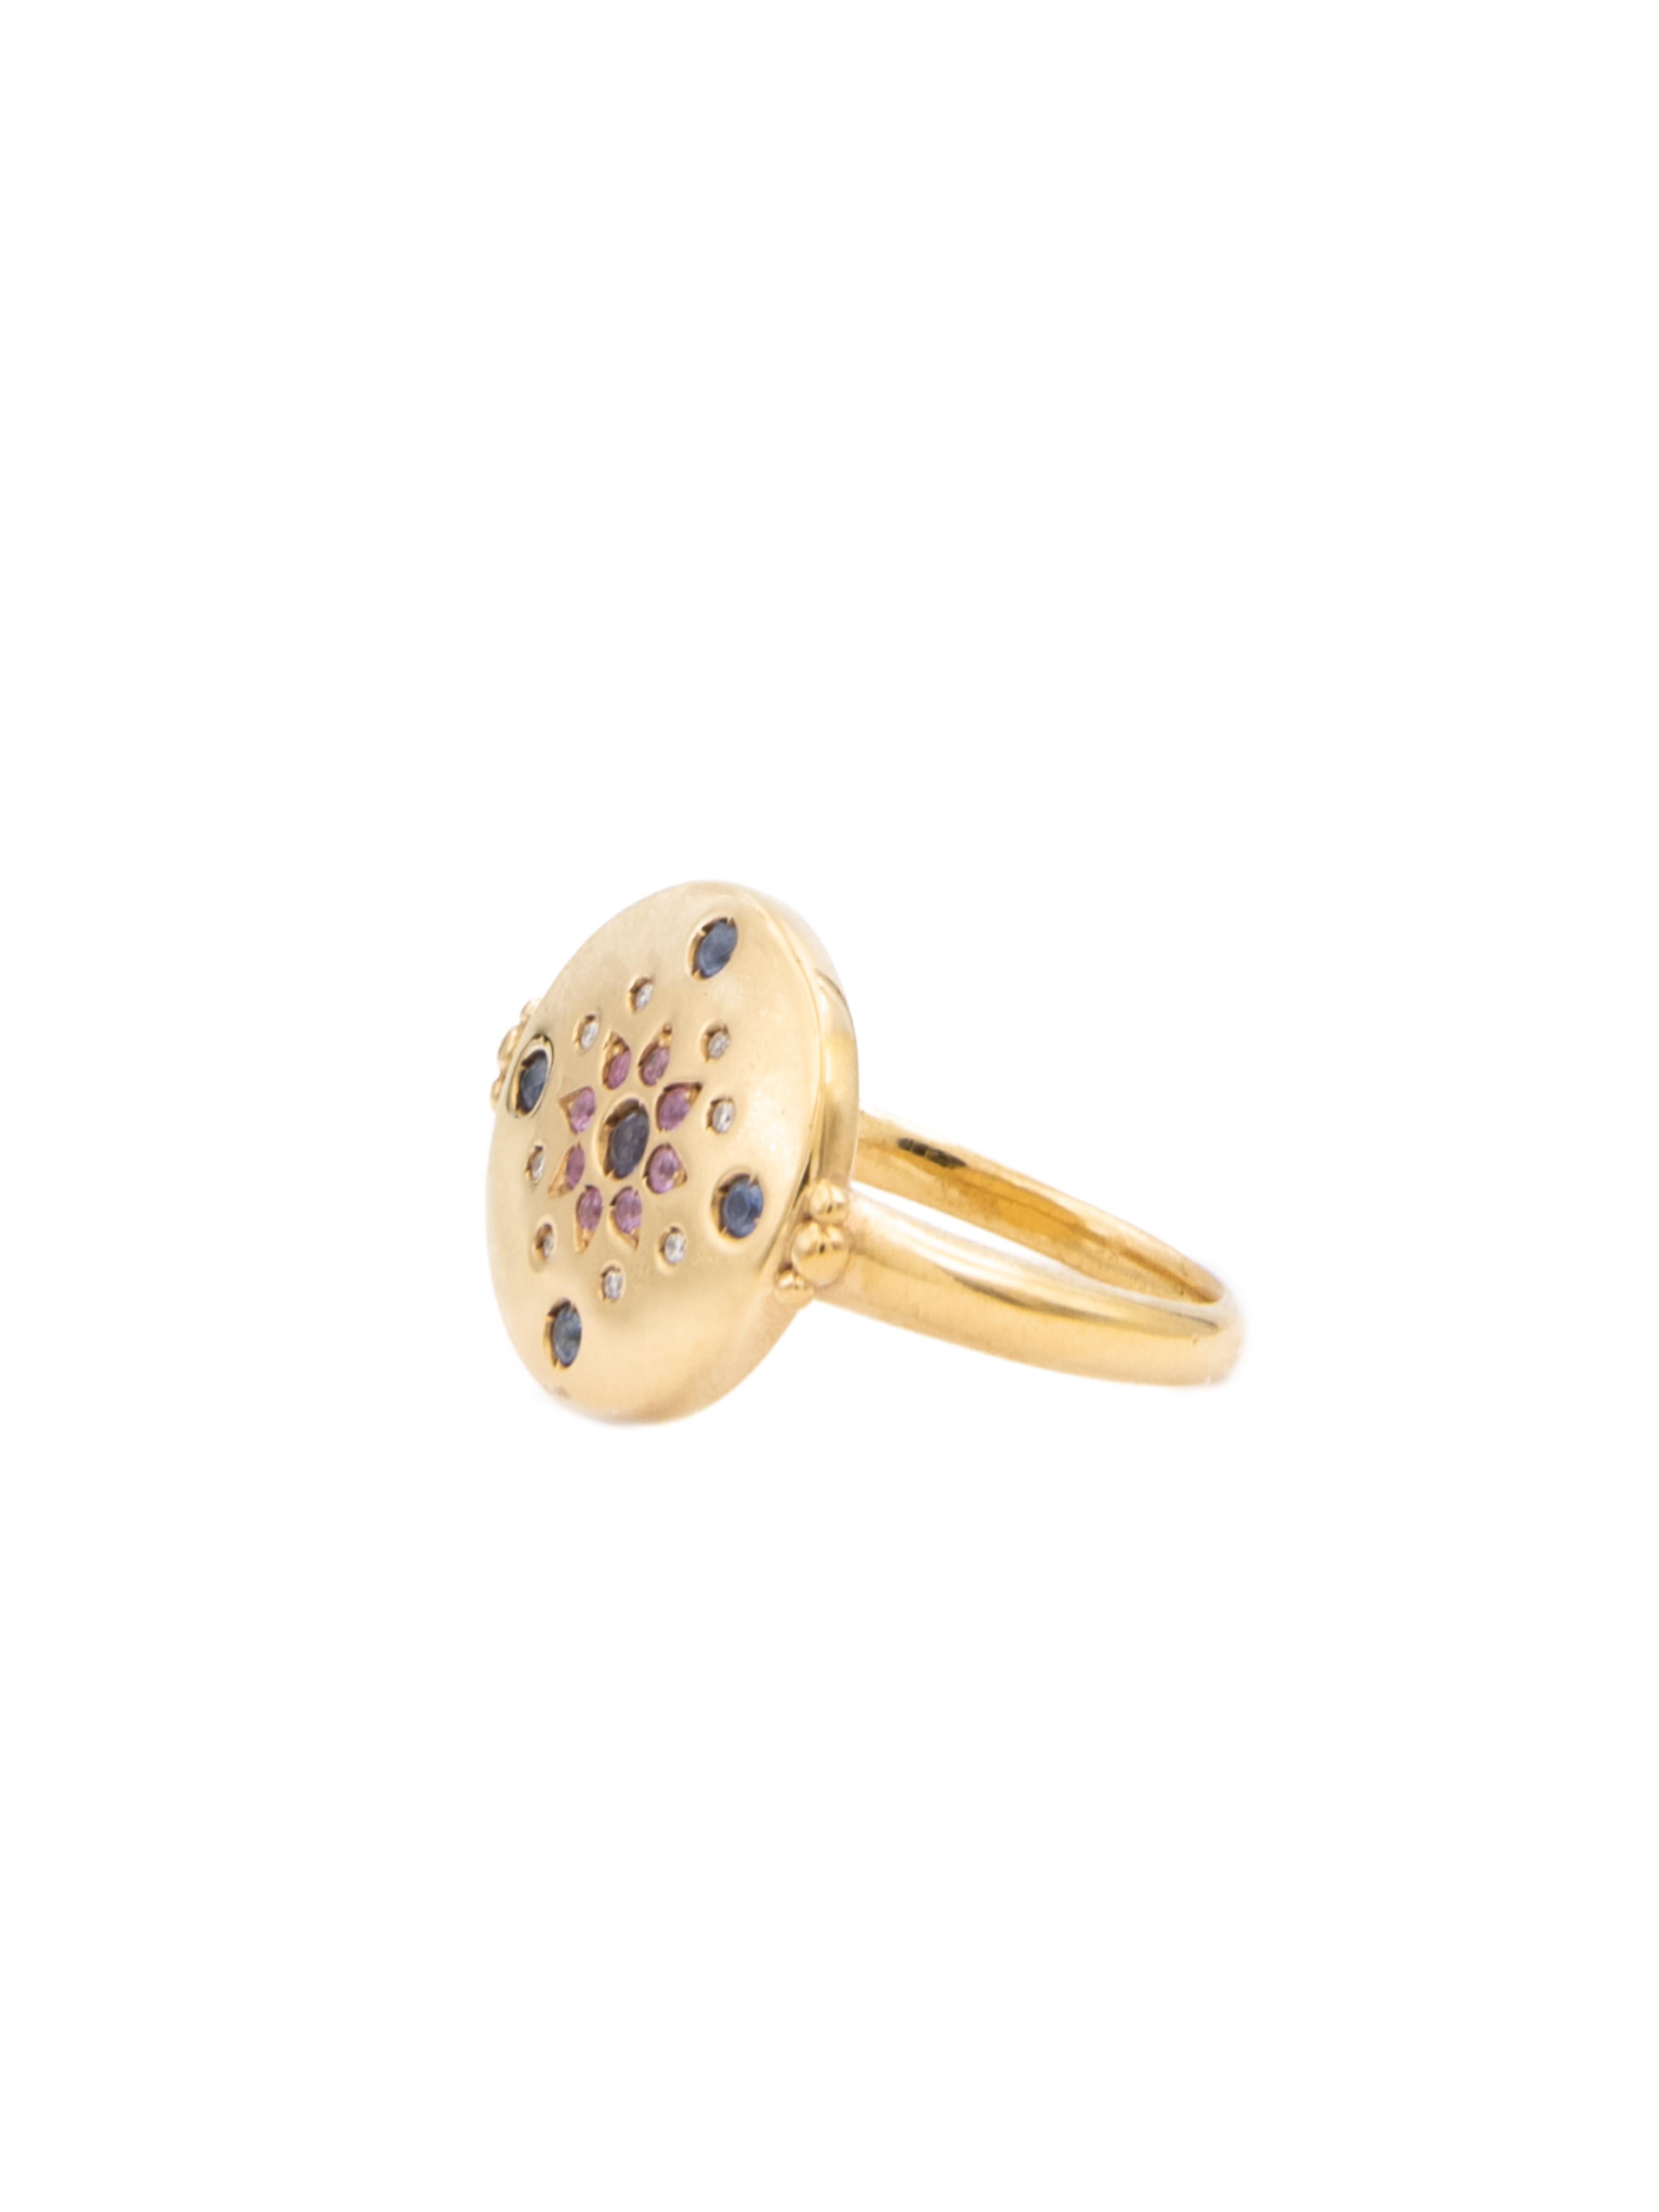 18 karat yellow gold signet ring set with 21 diamonds (0,29-carat).

The ring is available in three sizes (Italian sizes 12, 14 and 16 / US sizes 6, 6 3/4 and 7 1/2)
 
Please note that the ring described corresponds to the first picture of this